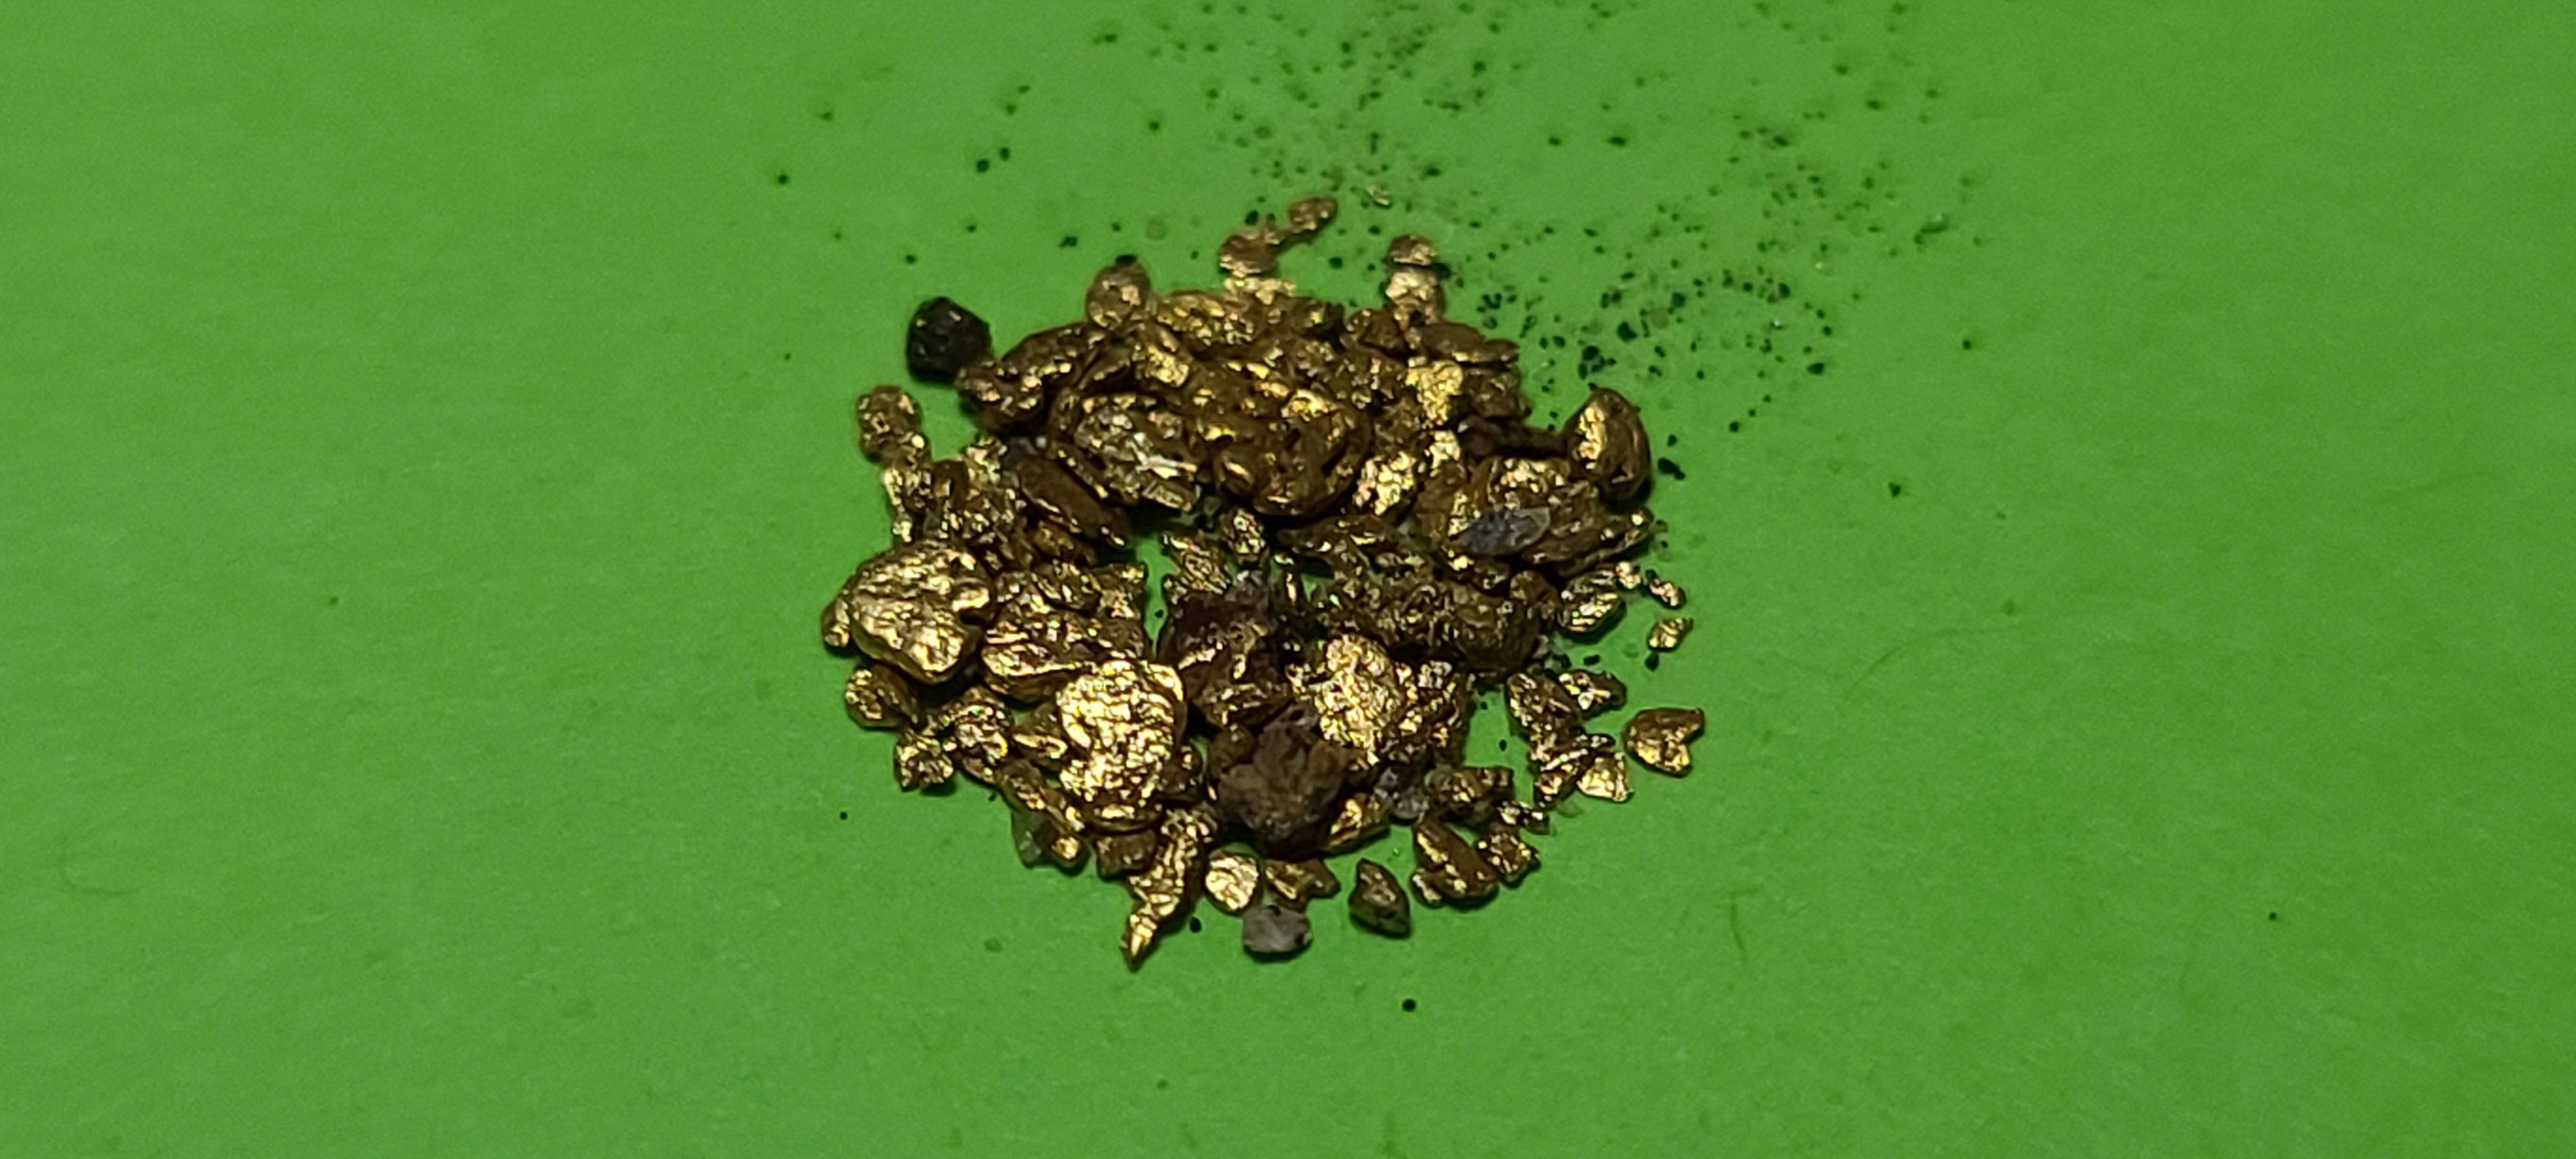 20210508 152445

I bought some bags of paydirt and this was the results. .035oz